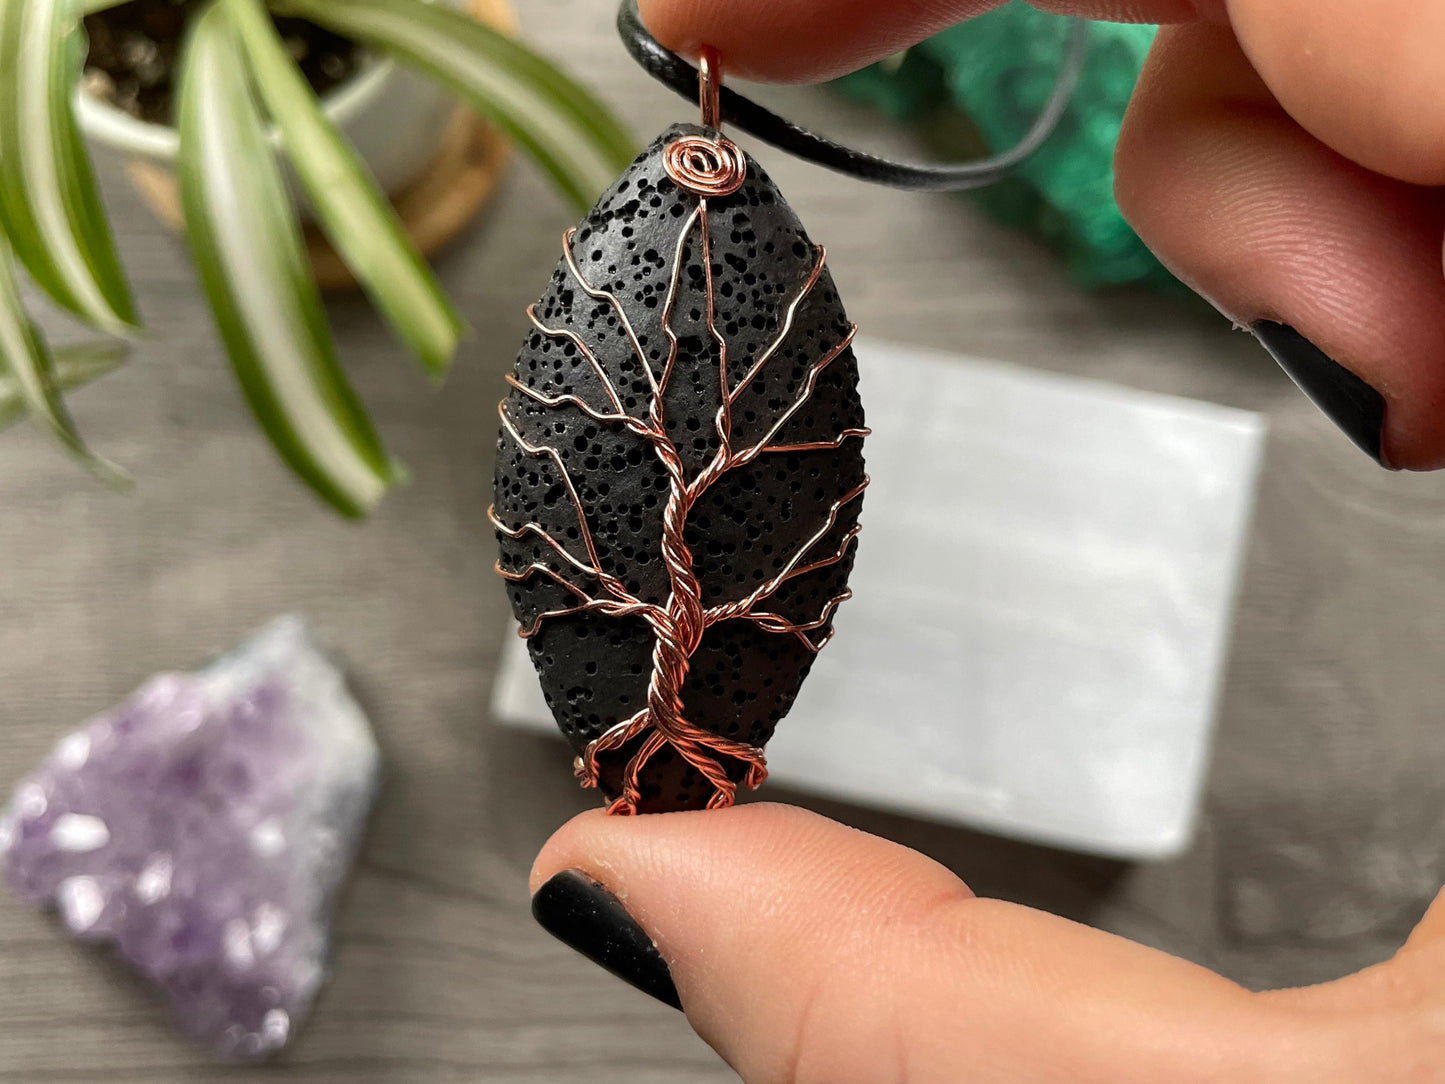 An image of a necklace featuring a wire-wrapped pendant. The wire is in the shape of a tree and it is wrapped around a lava stone.